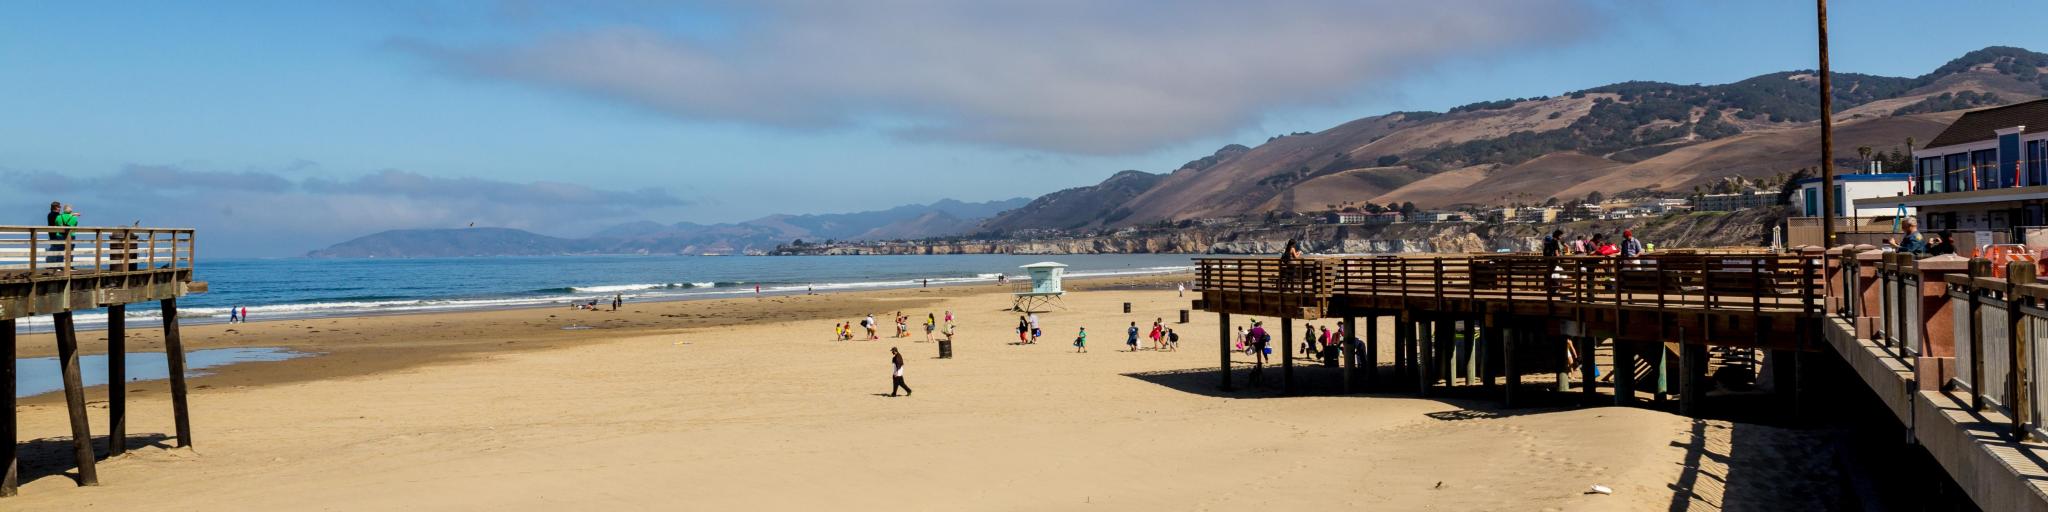 View across sandy beach and boardwalk at Pismo Beach, with bright blue skies and ocean in the background